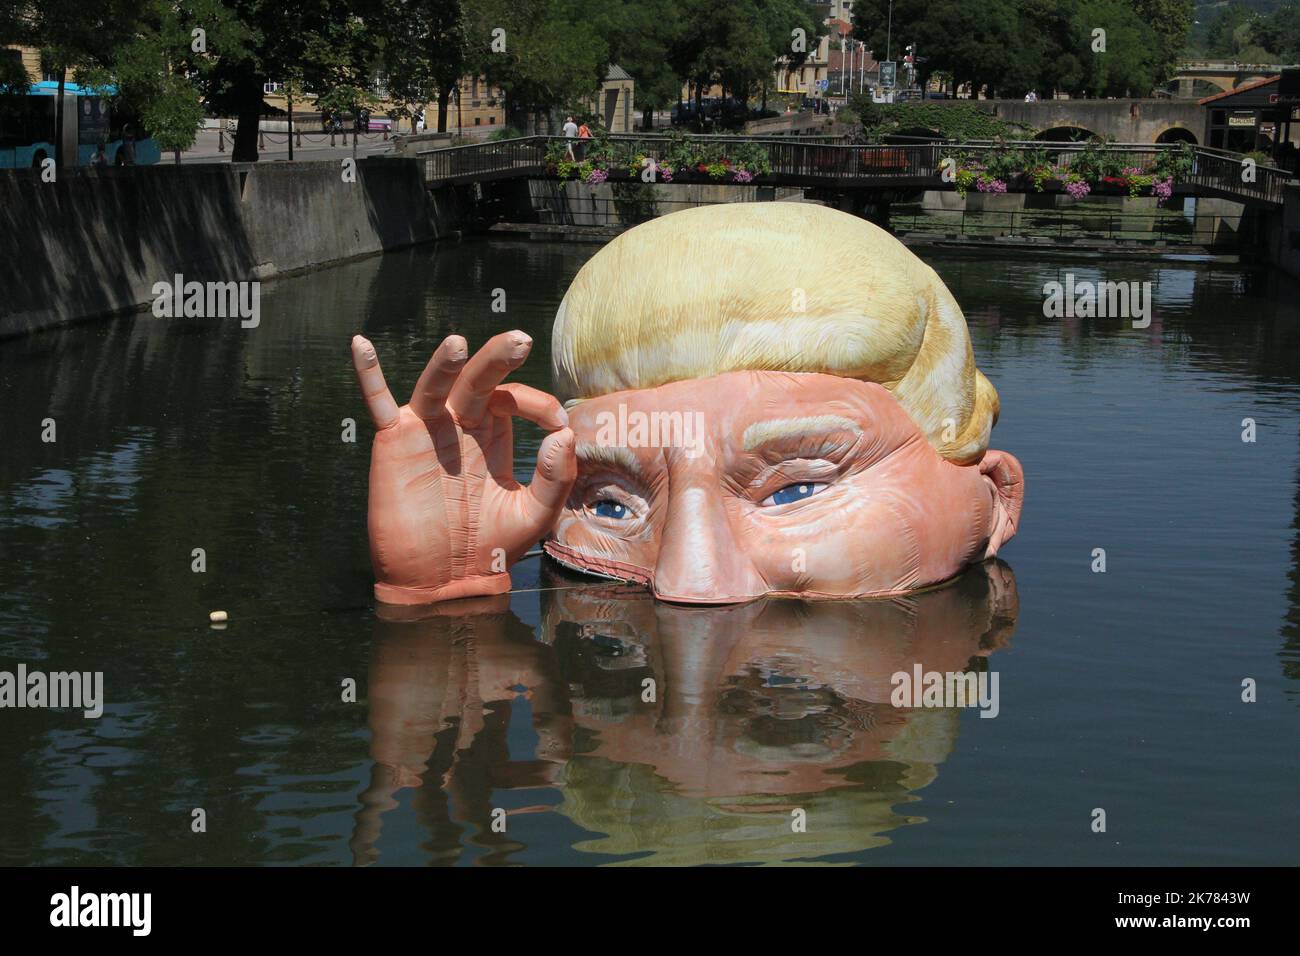 The installation 'Everything is fine' depicting the half submerged head of US President Donald Trump by Jacques Rival, architect, displayed in the Moselle river as part of the digital art festival 'Constellations de Metz' in Metz, eastern France.  Stock Photo